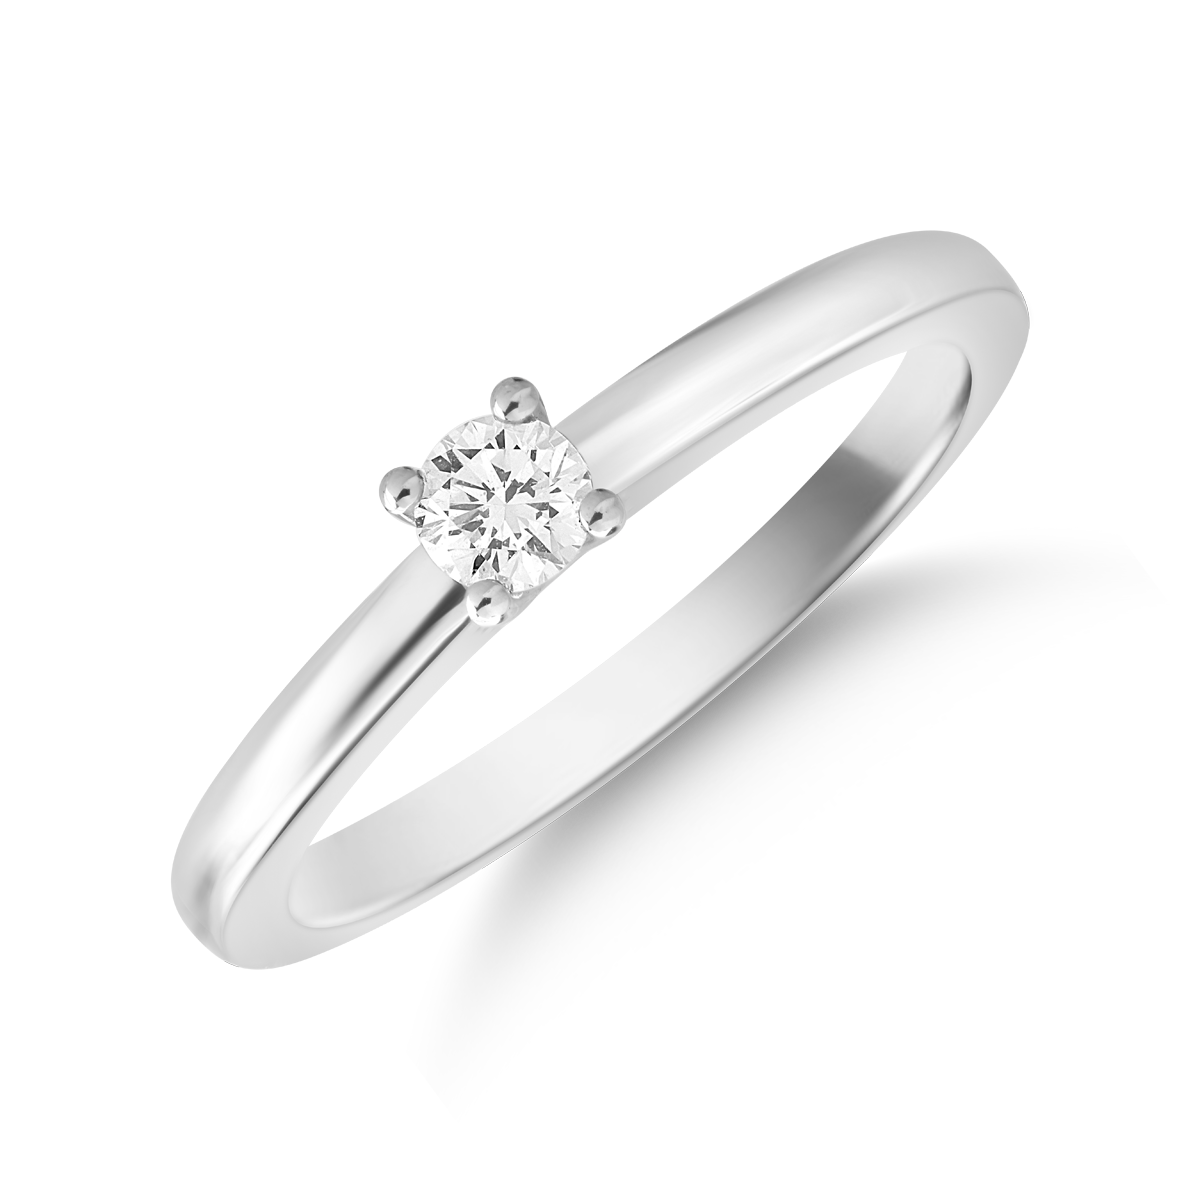 18K white gold engagement ring with a solitaire diamond of 0.14ct